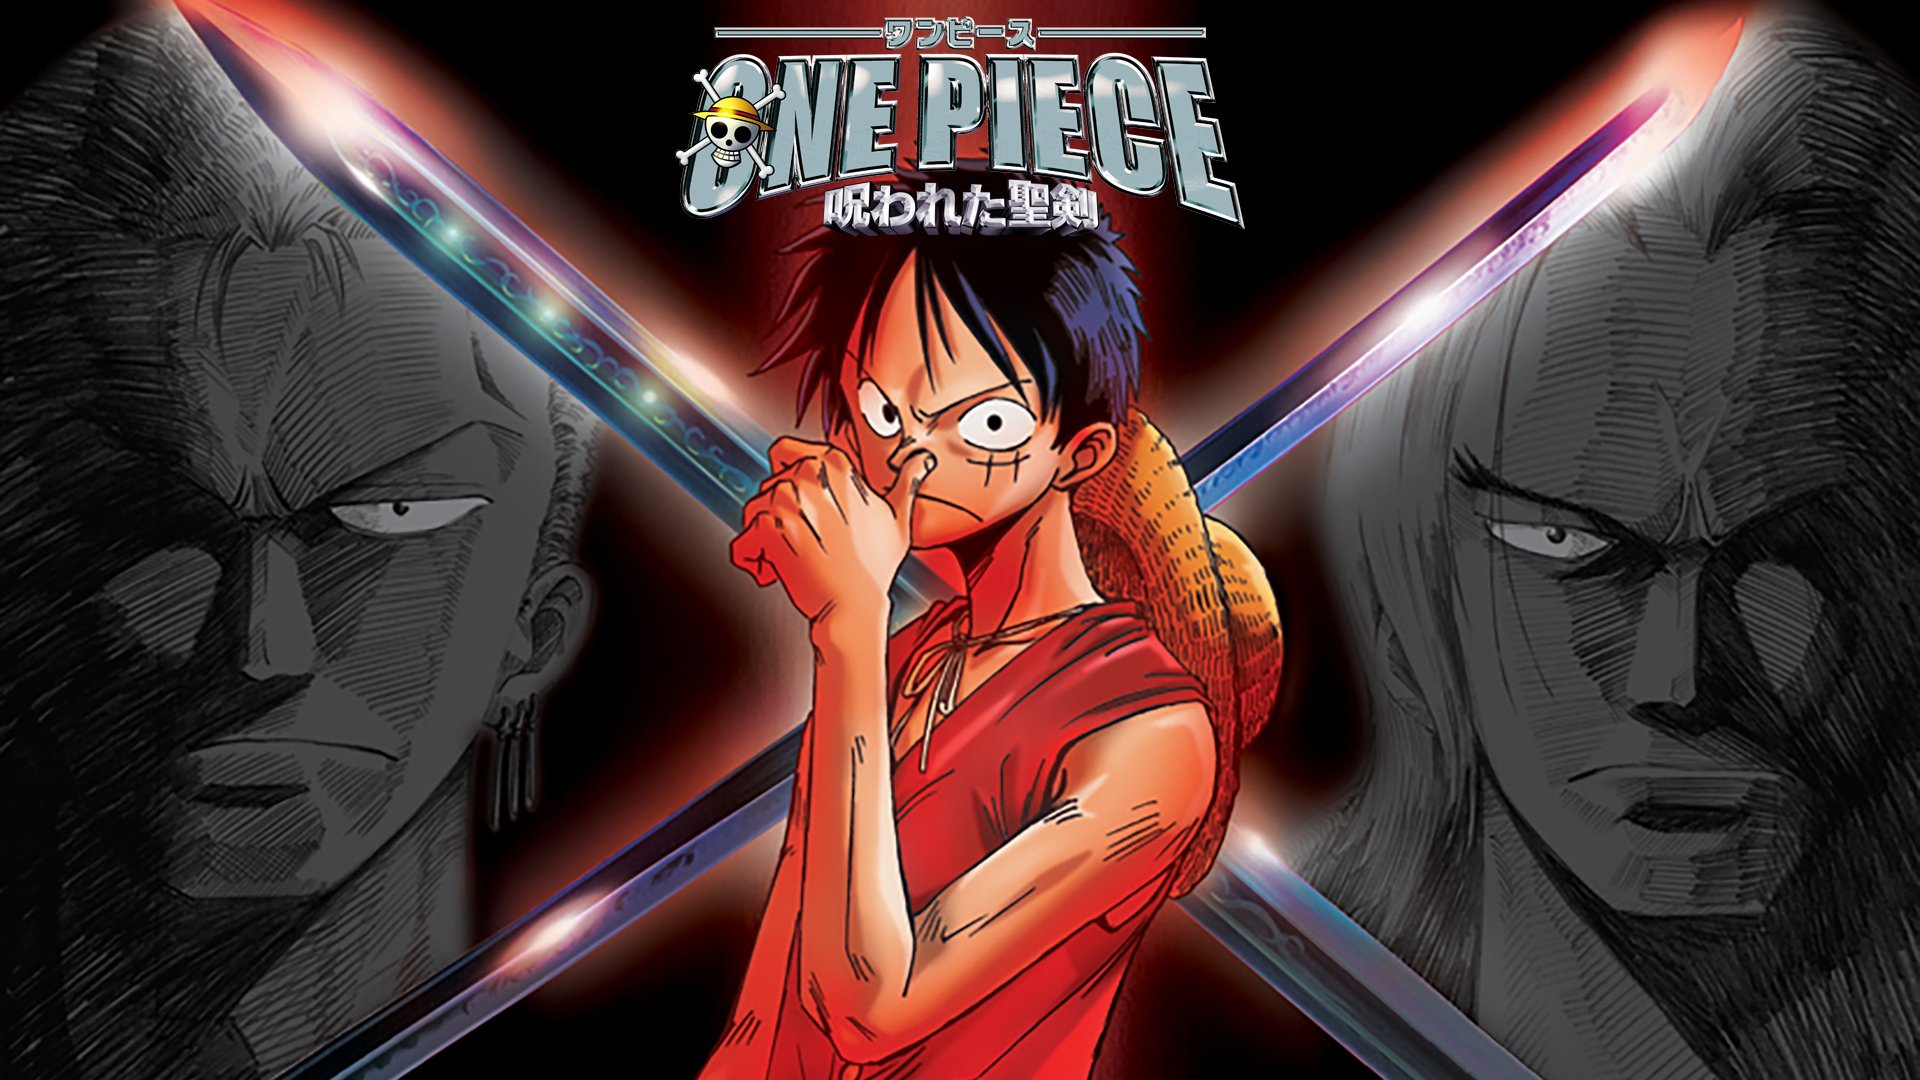 ONE PIECE 呪われた聖剣 / One Piece: The Cursed Holy Sword